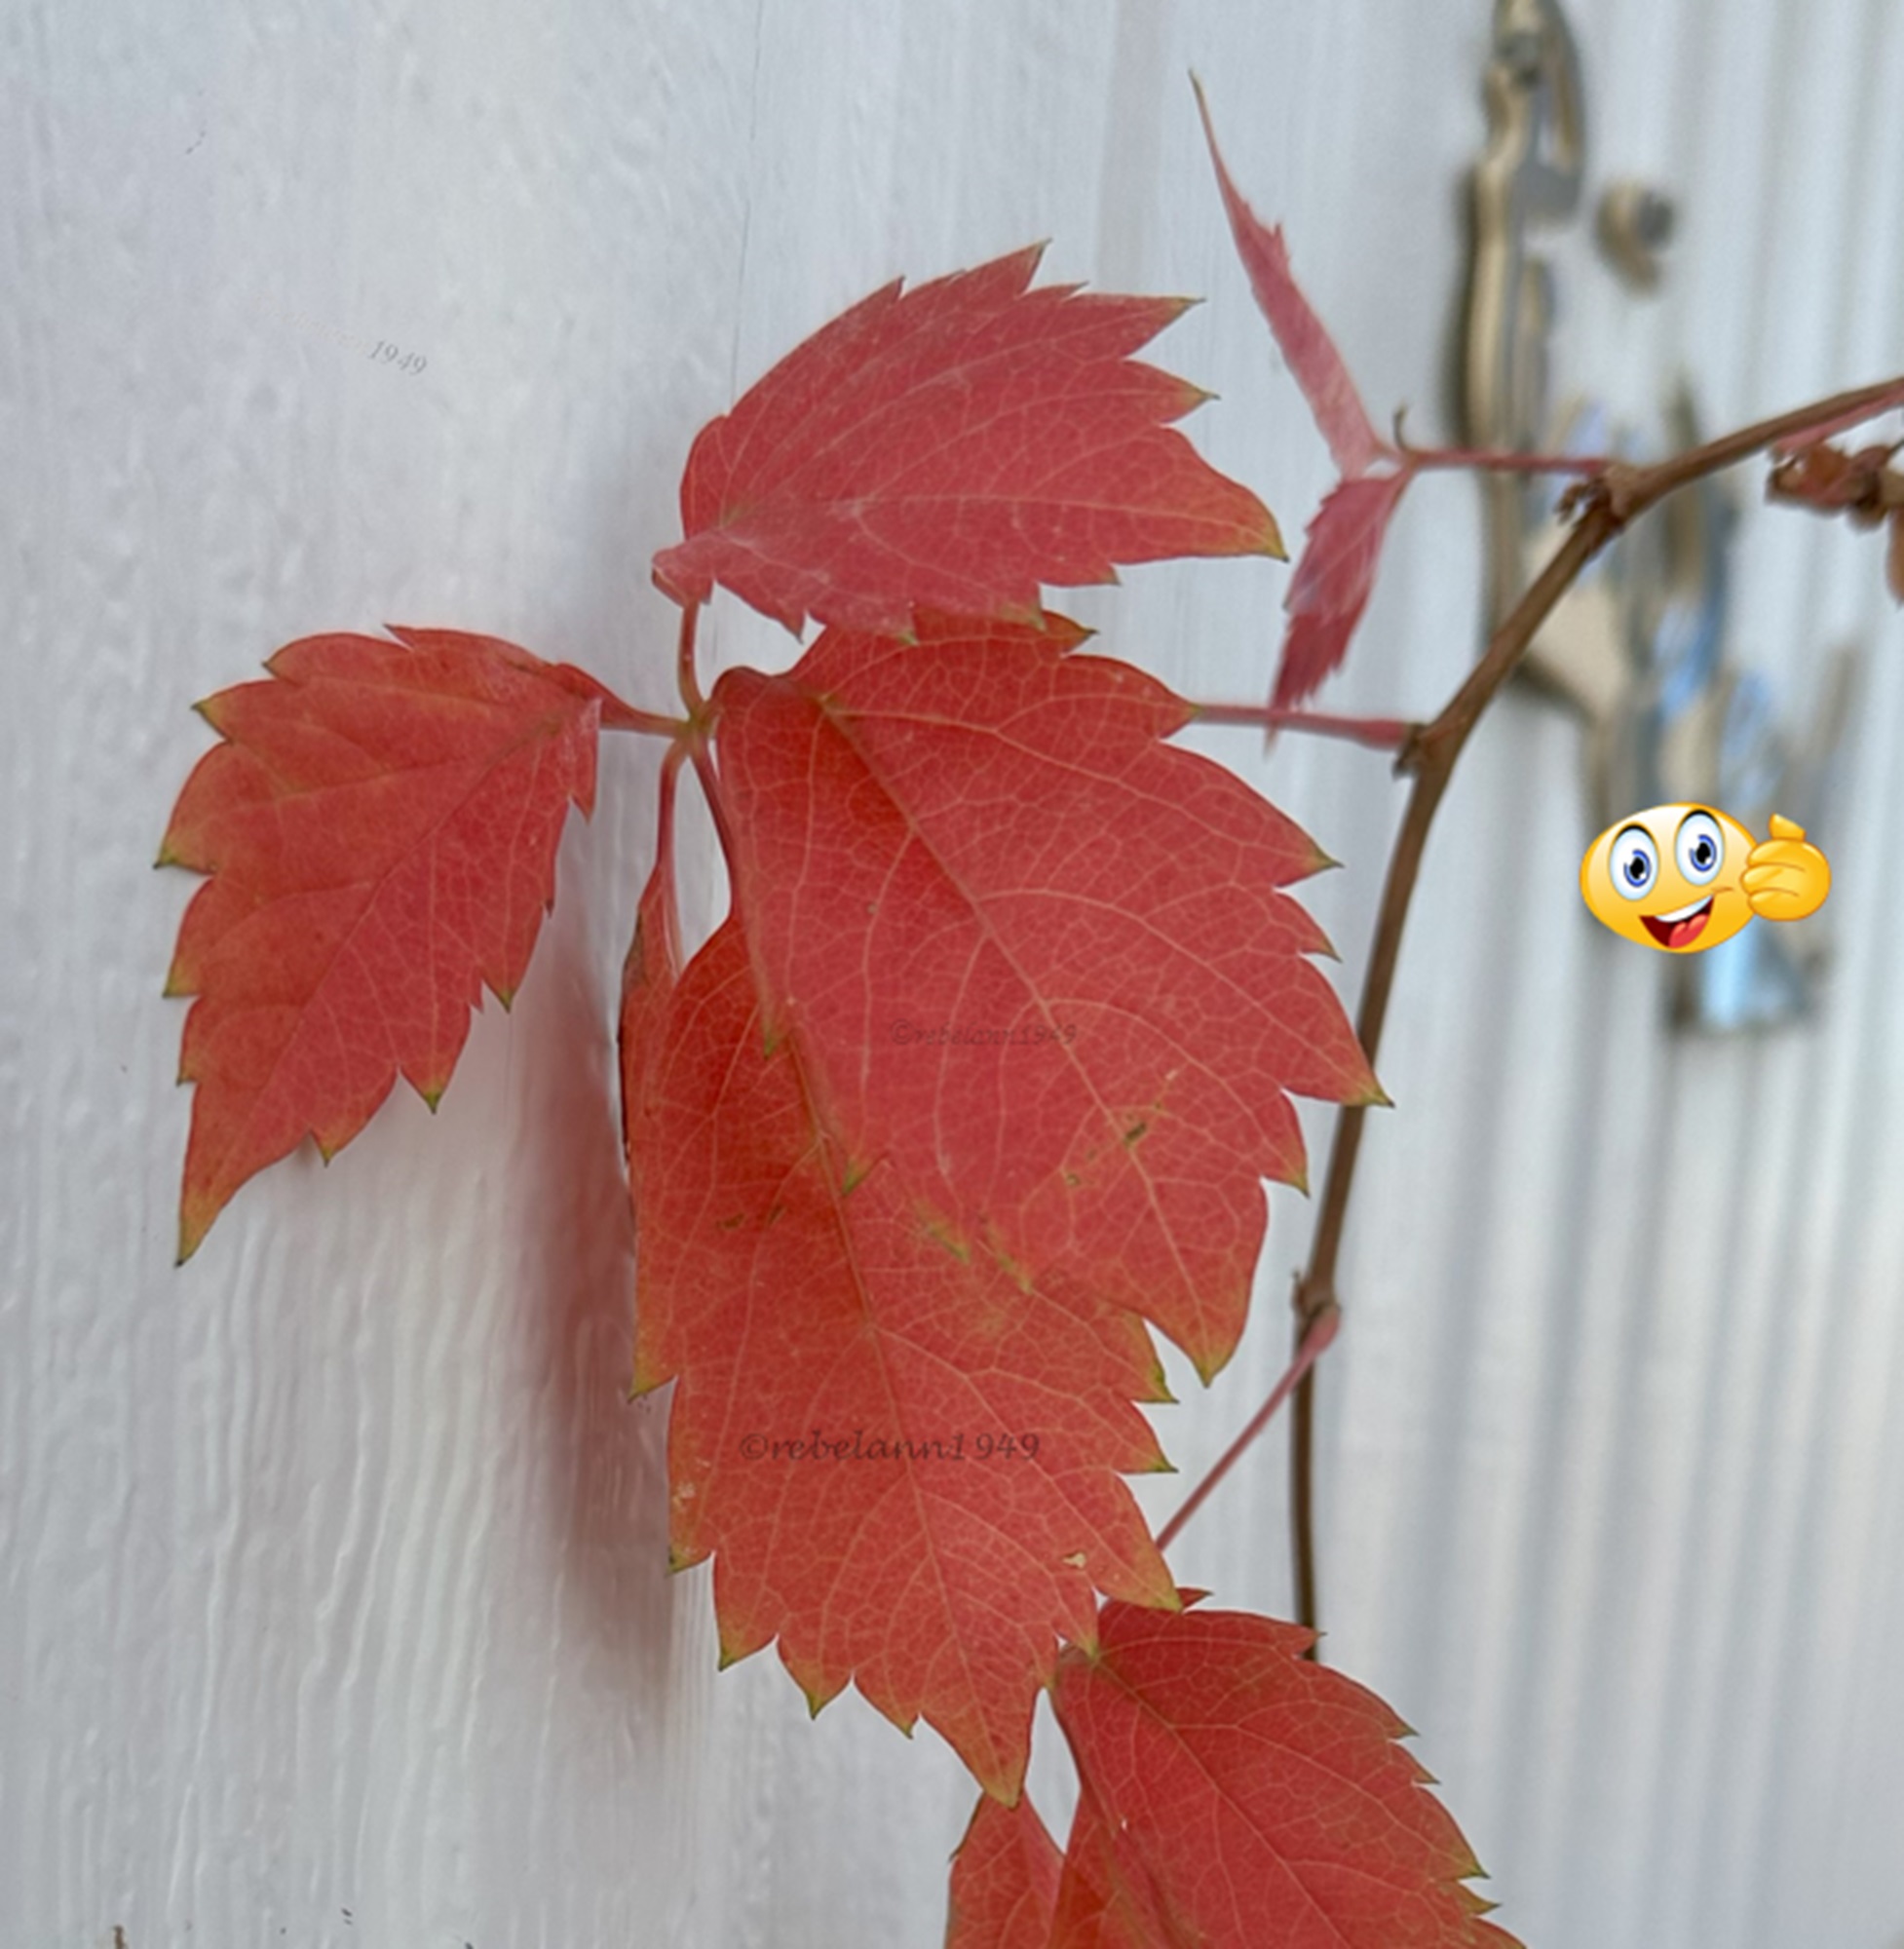 I don&#039;t have much fall color but my virginia creeper gives me a few orange leaves about this time of year.